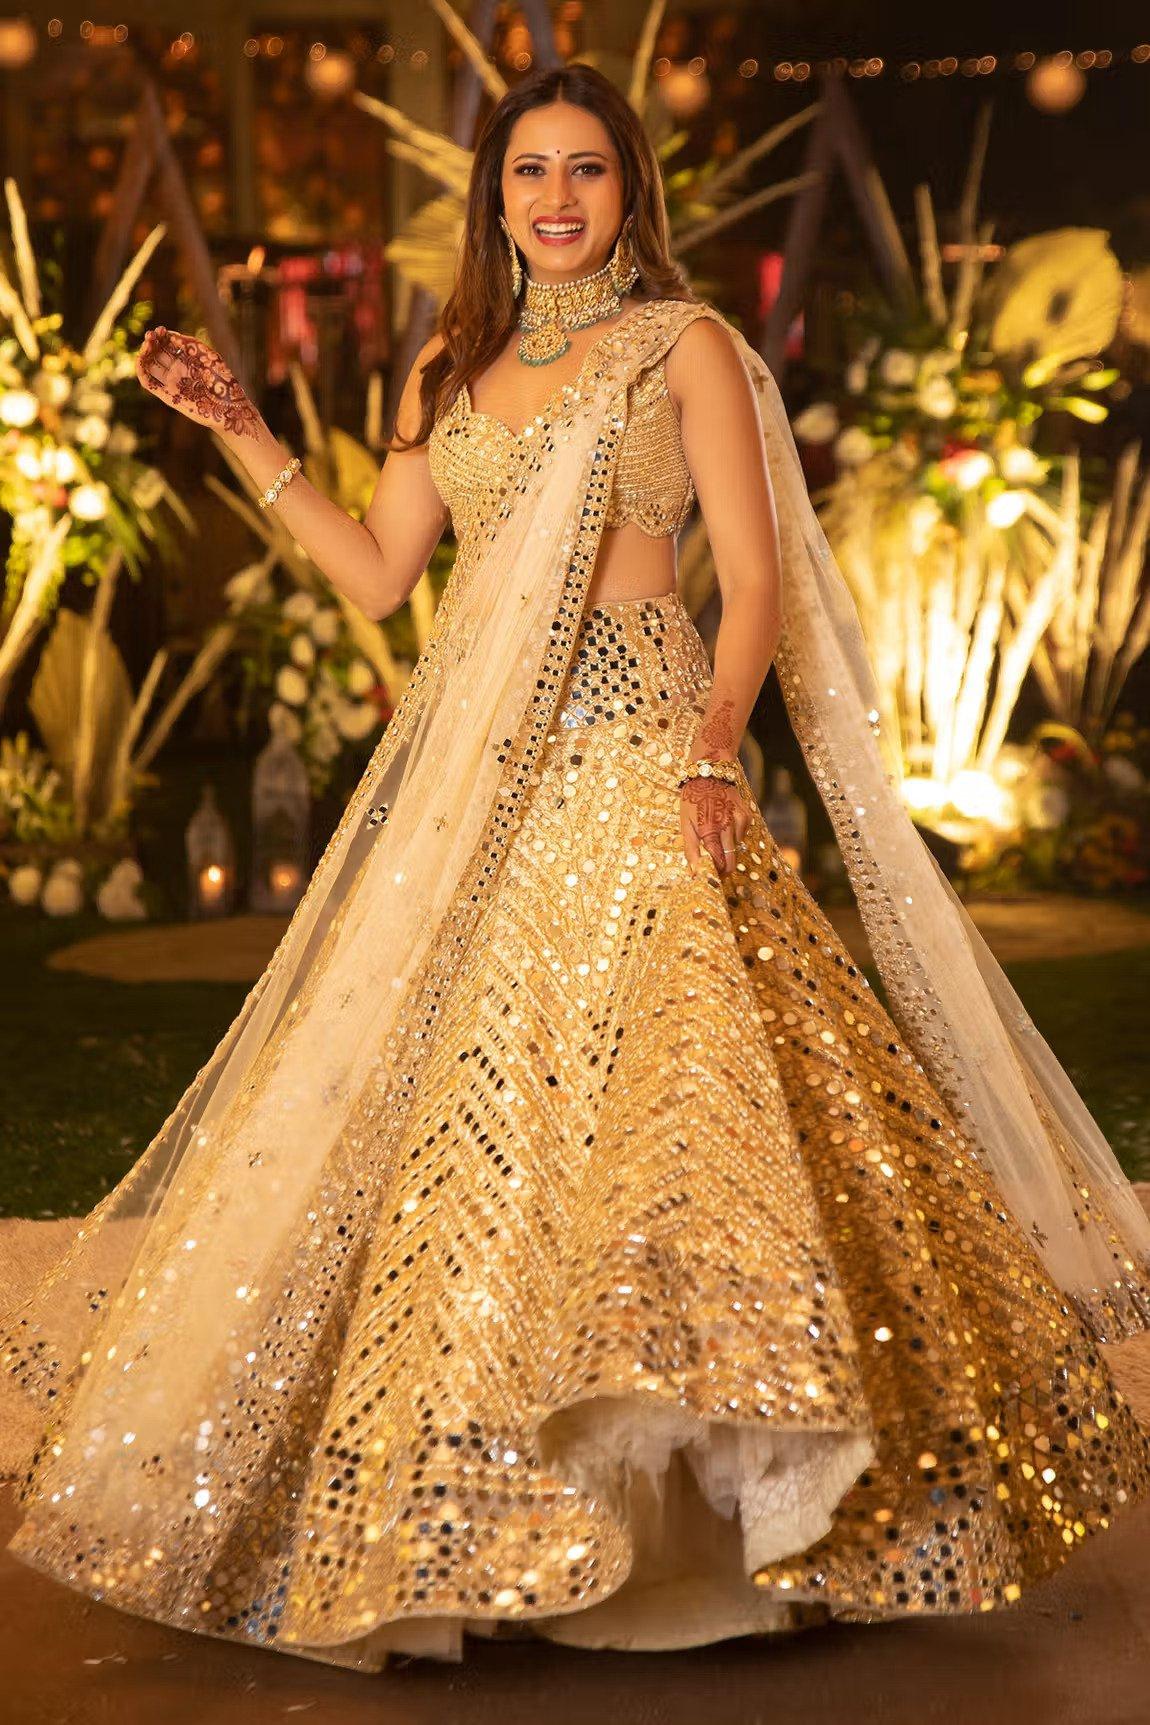 Buy the Latest Indian Designer Bridal Lehenga Online – All About The Woman